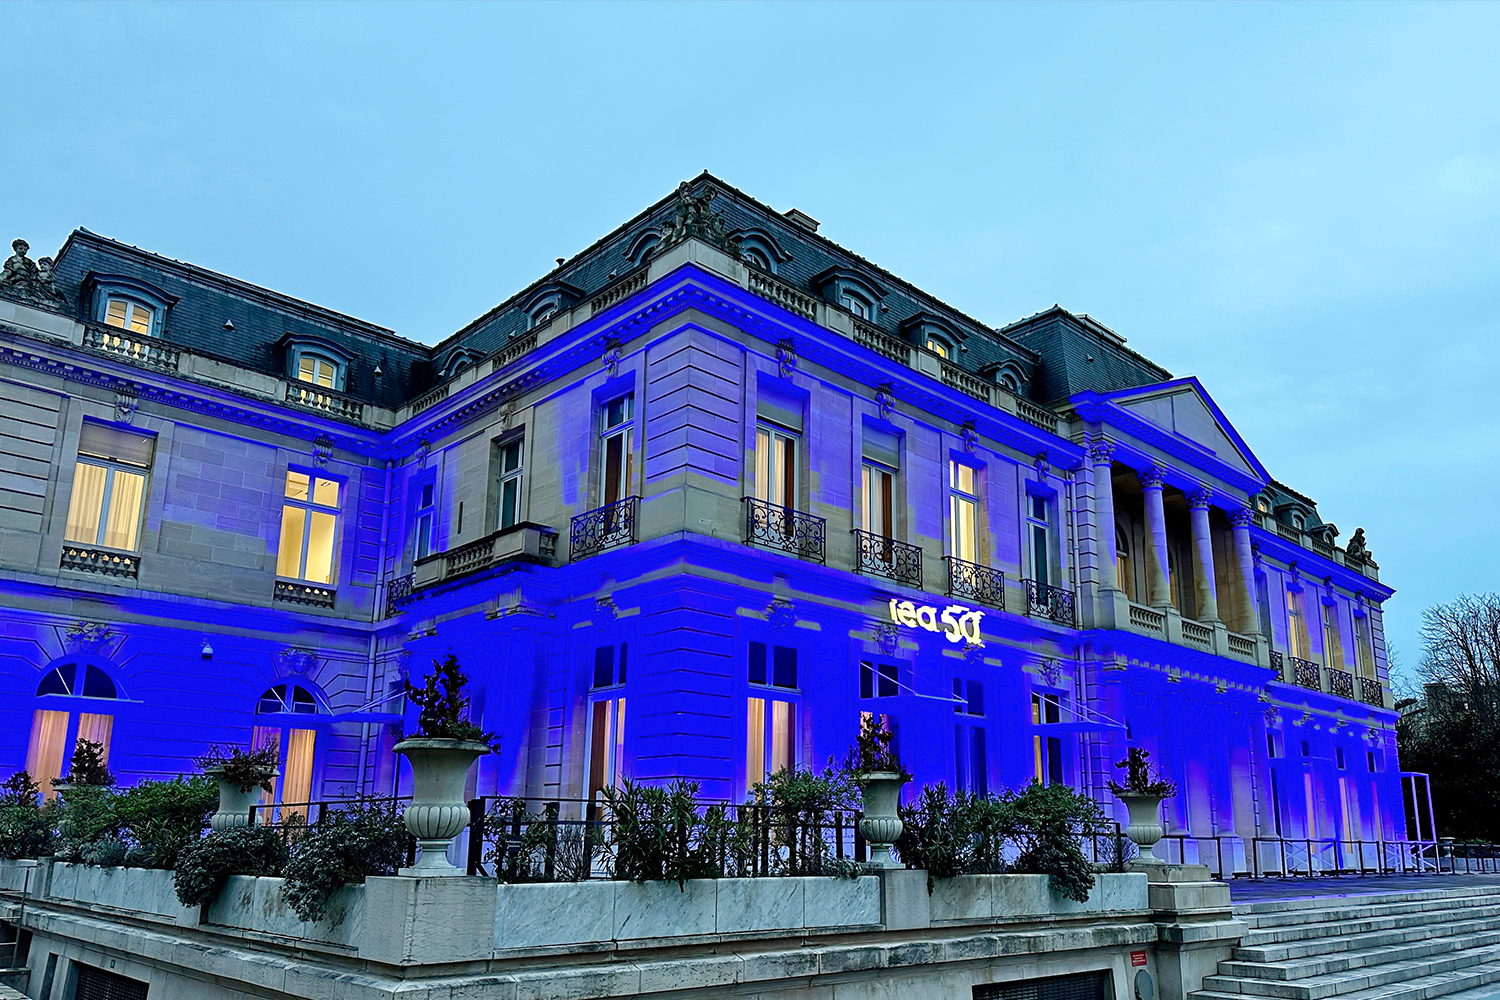 The exterior of a fancy marble building in Paris, lit up with blue lights and the letters 